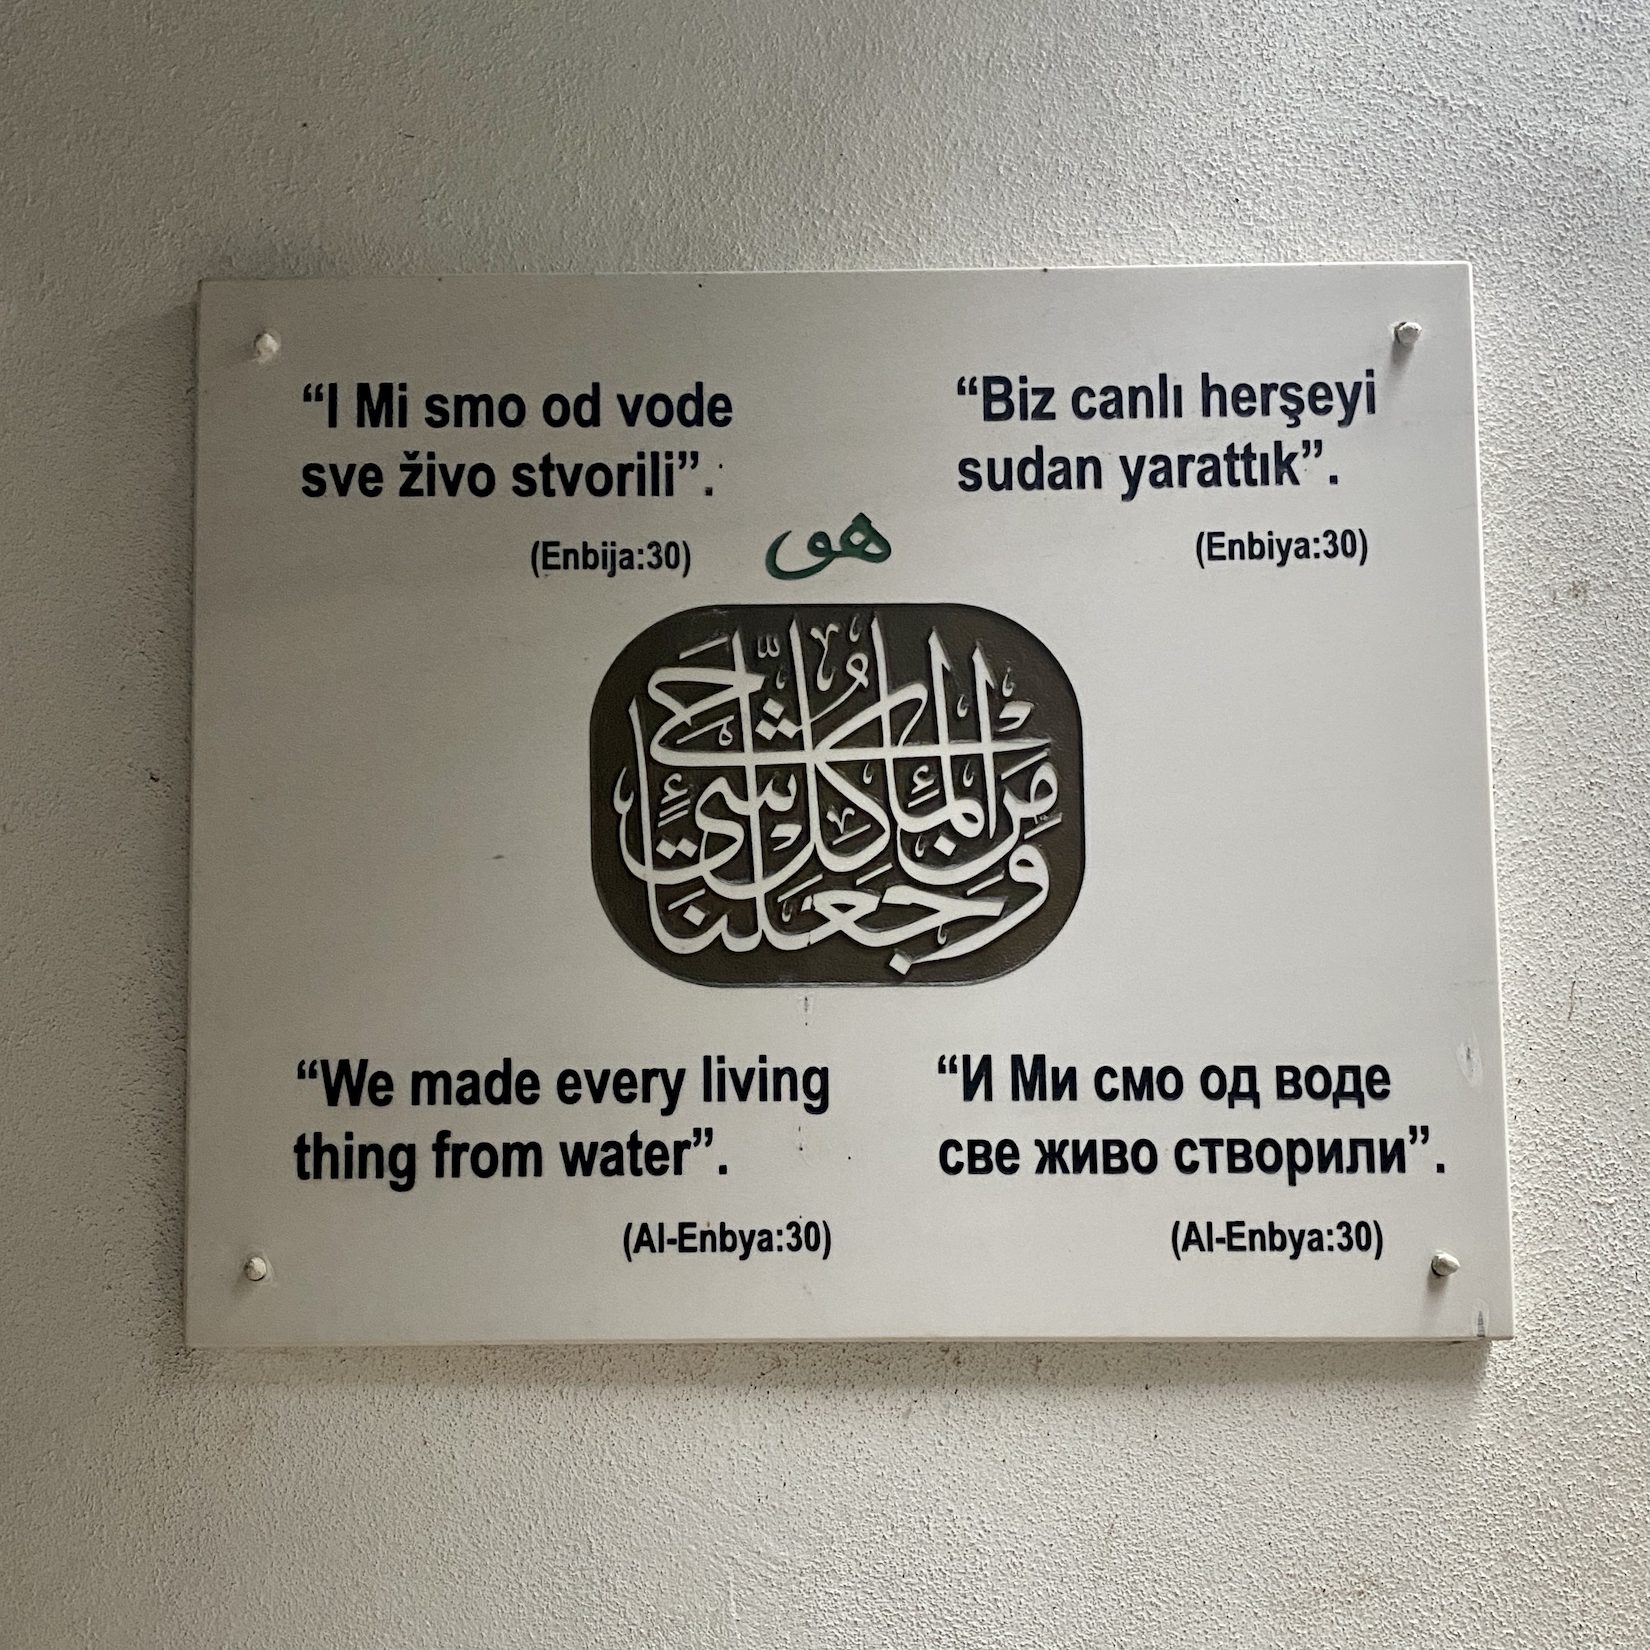 Sign at Dervish House Monastery, Bosnia & Herzegovina that says "We made every living thing from water" in 4 languages